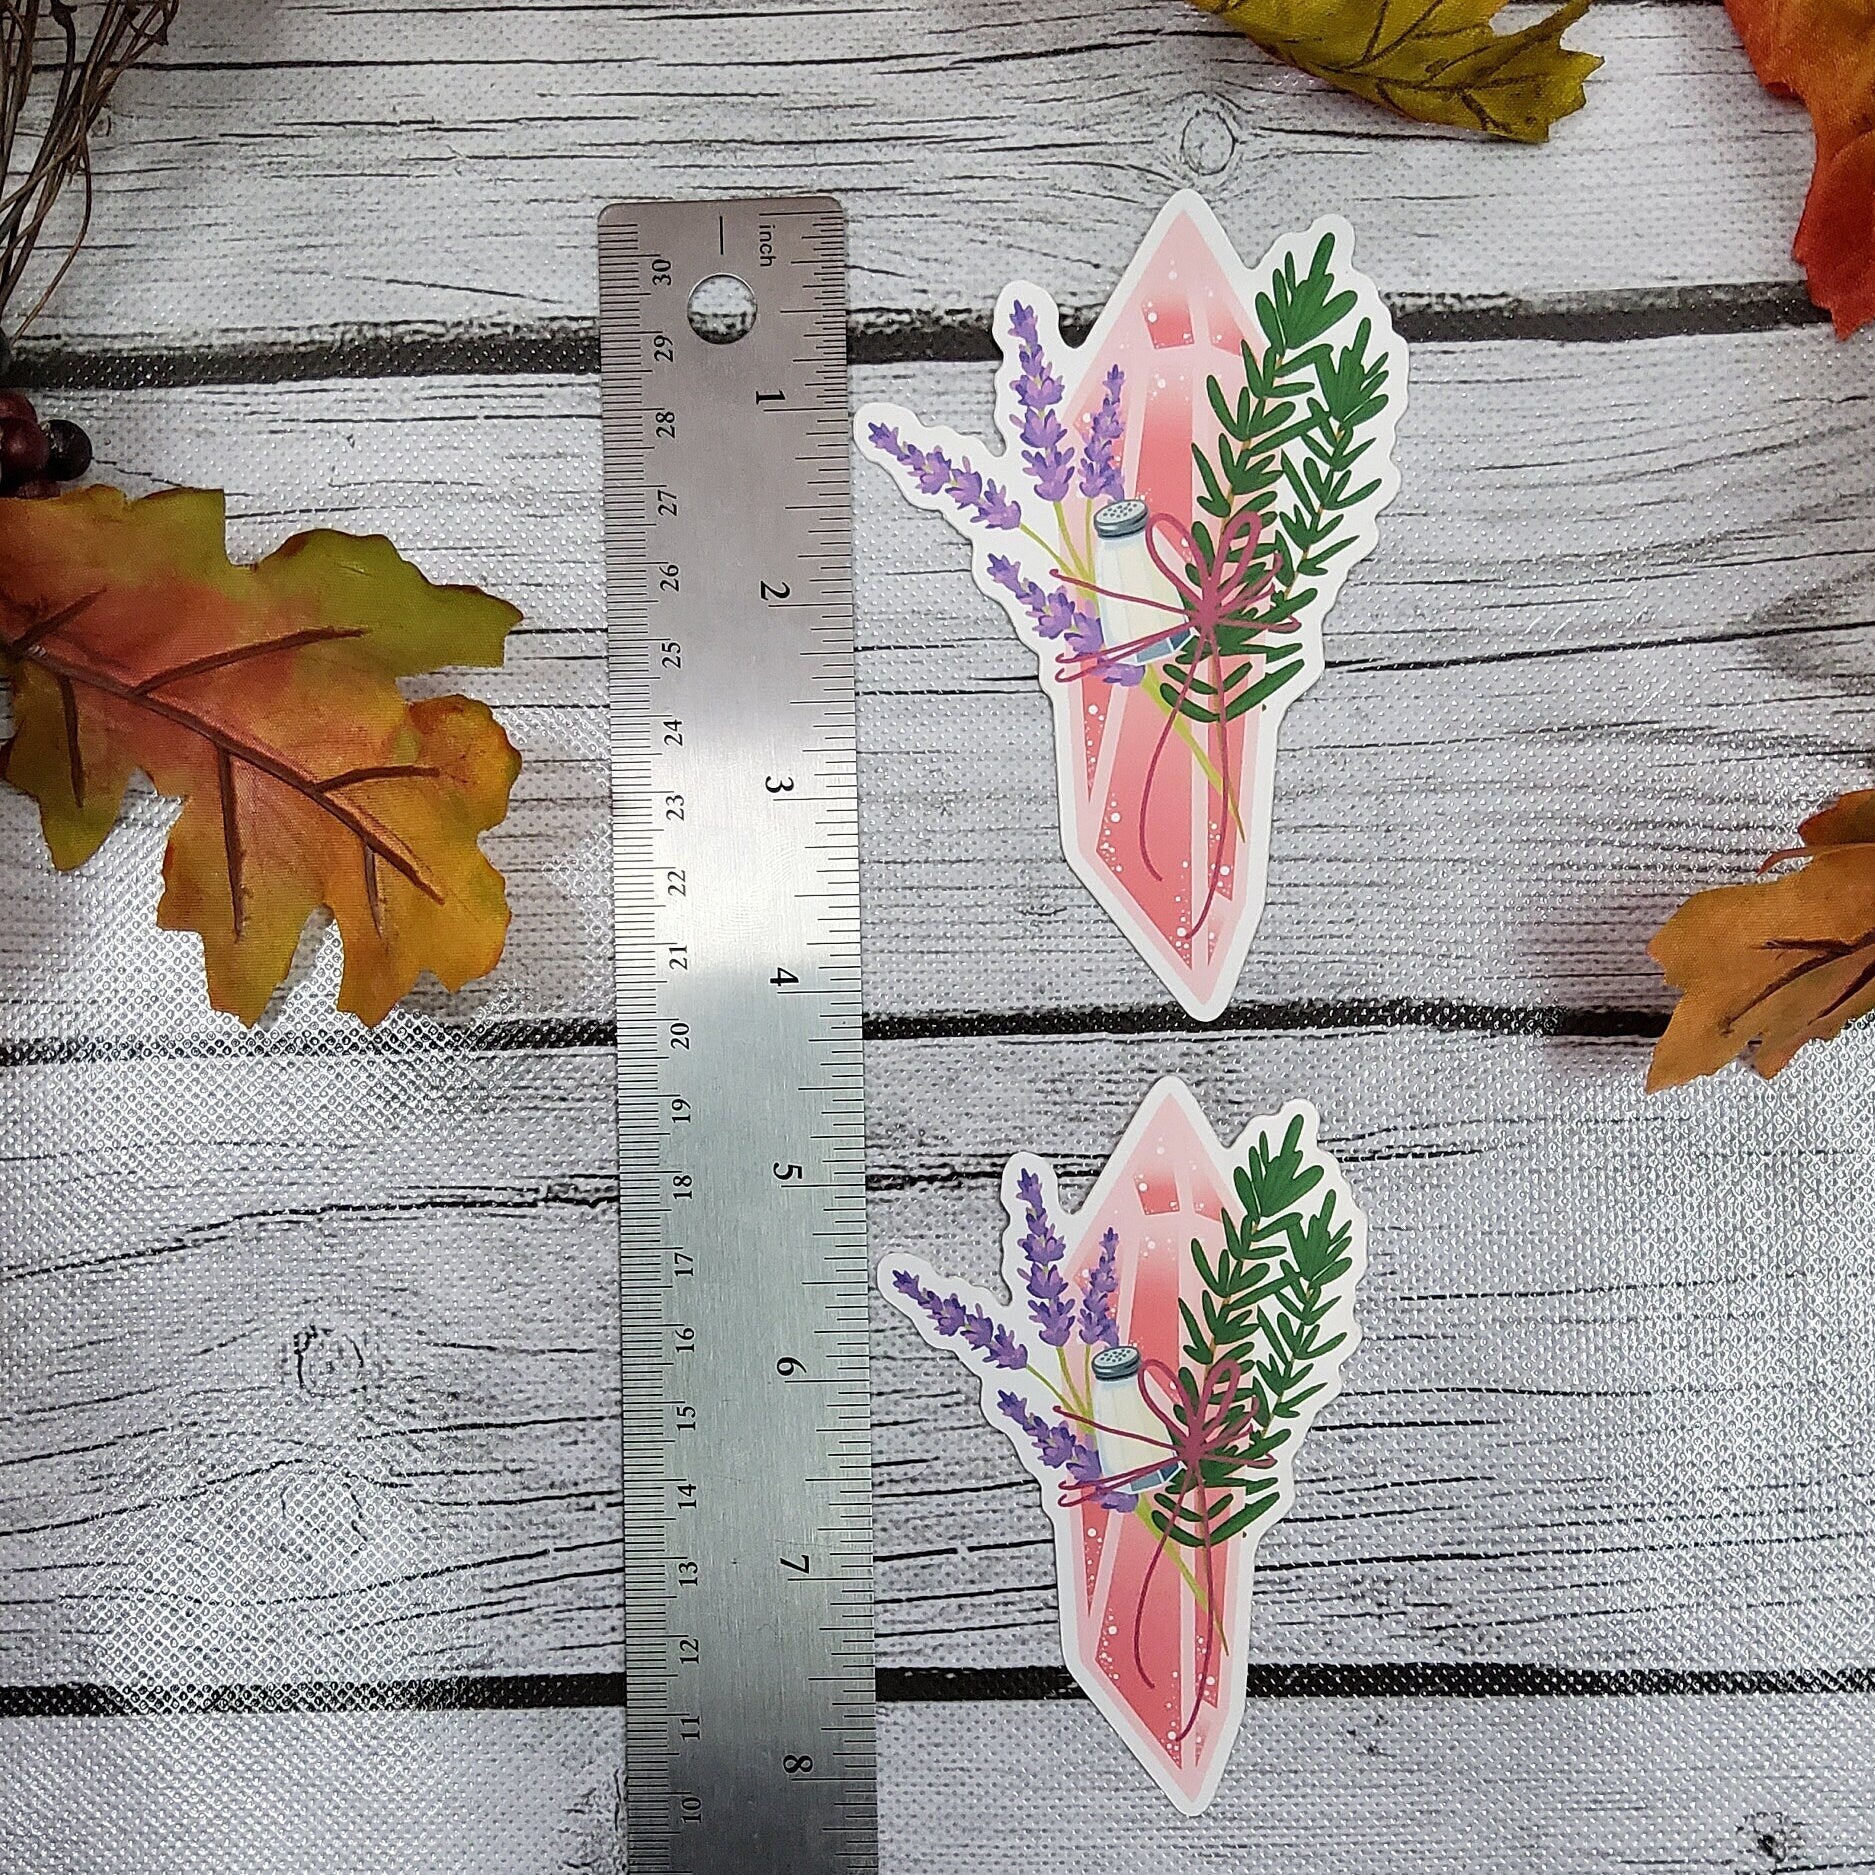 MATTE STICKER: Rosemary and Lavender Crystal Magic , Pink Aesthetic Crystal Sticker , Crystal Sticker , Magic Crystal Sticker , Crystals